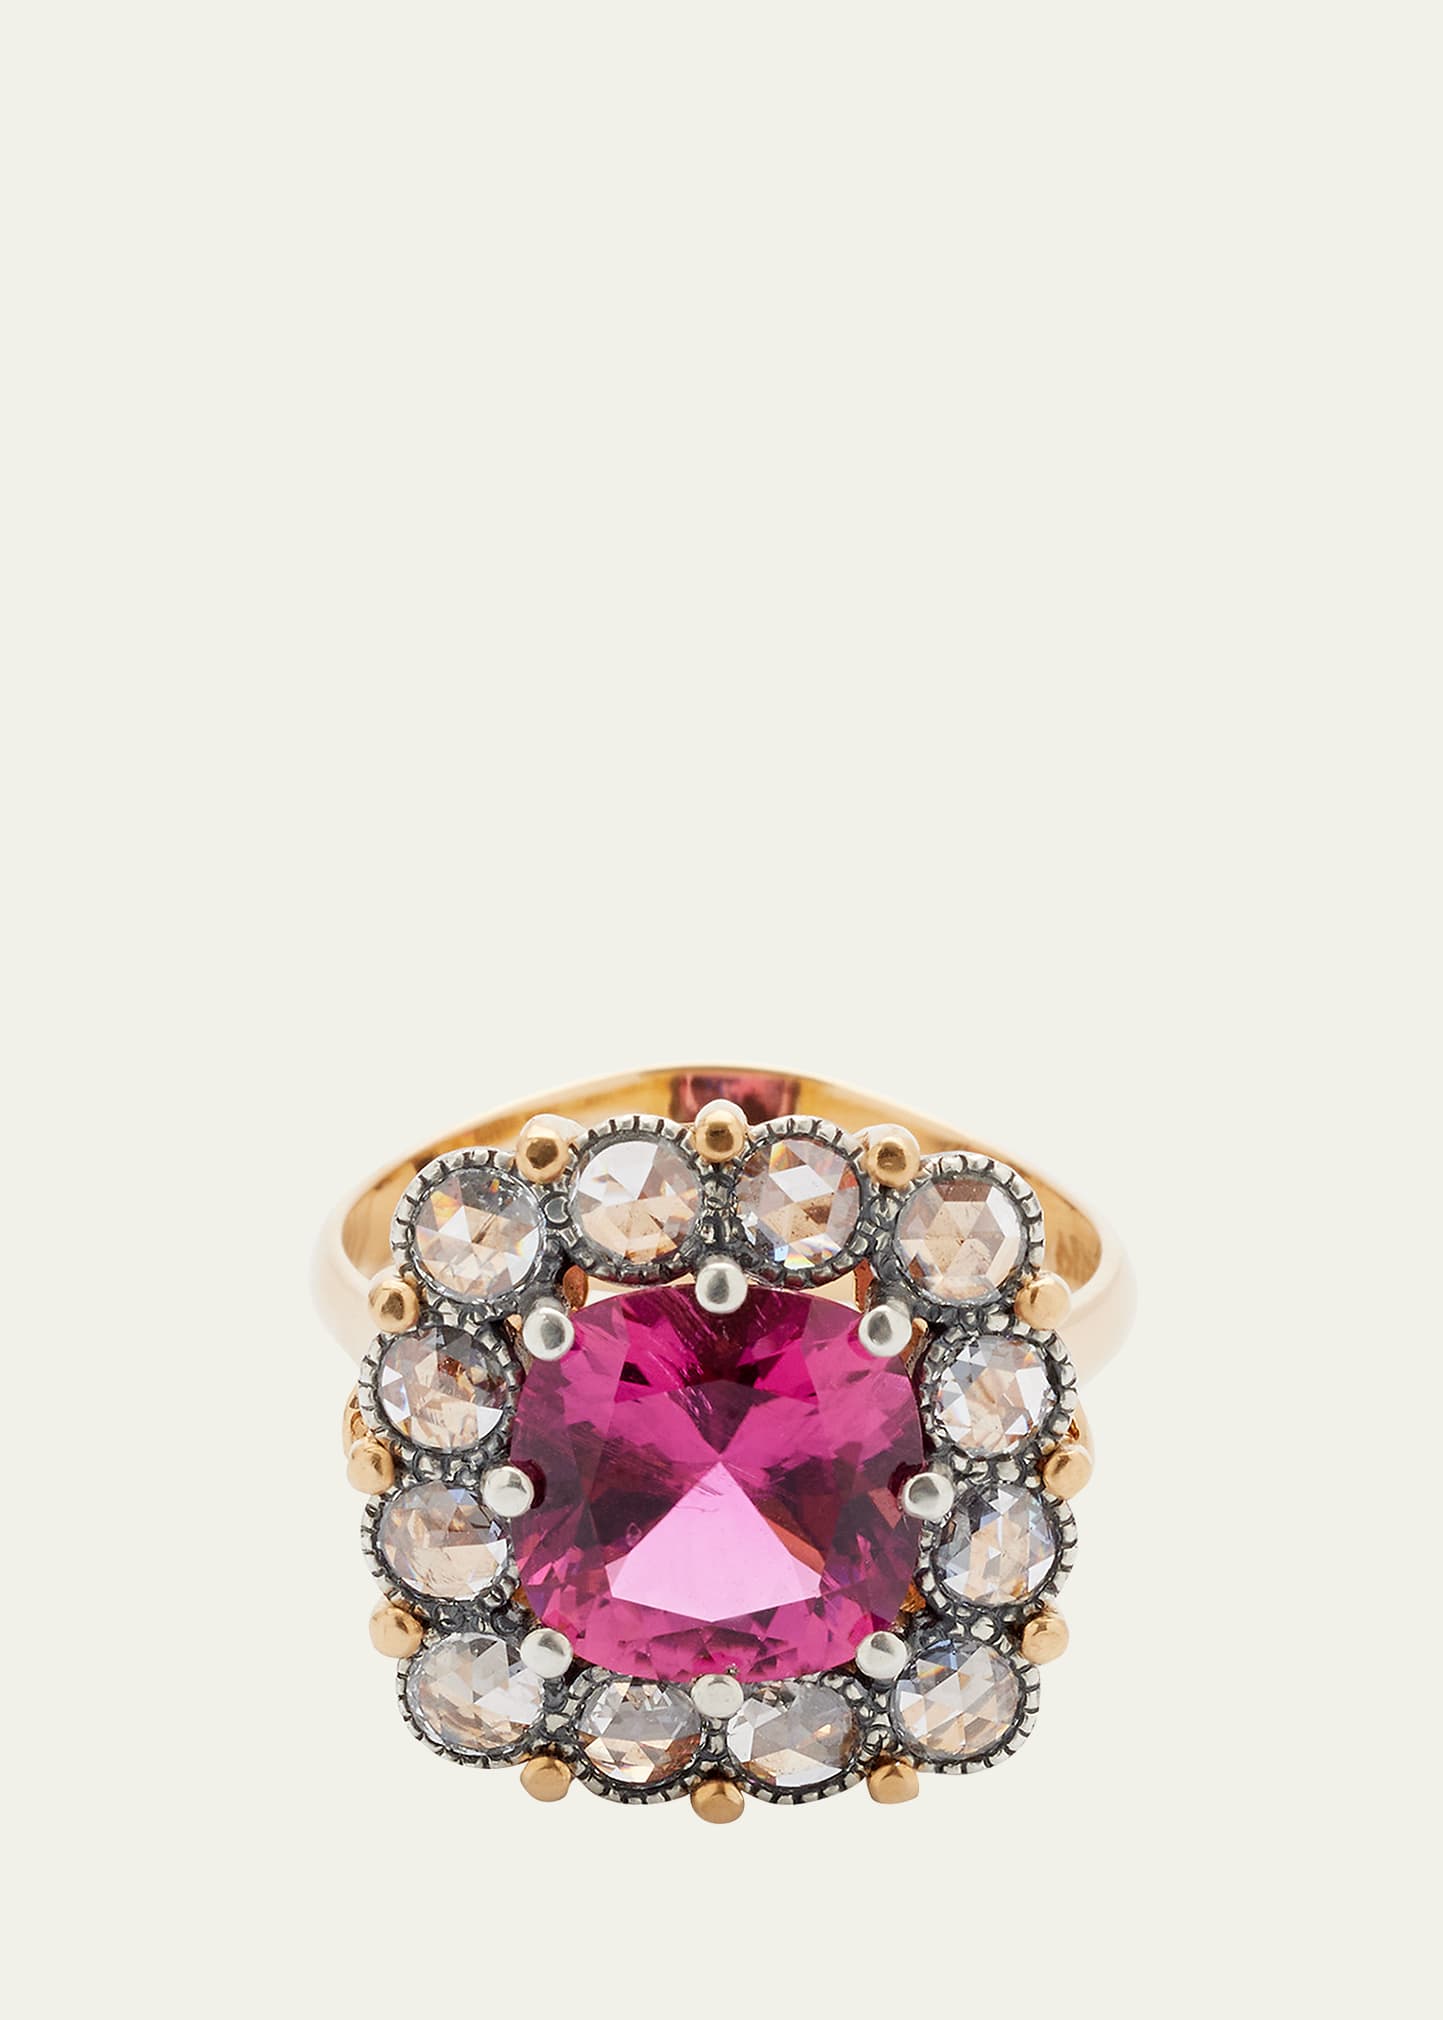 Rubellite Ring with Diamonds in 22k Gold and Silver